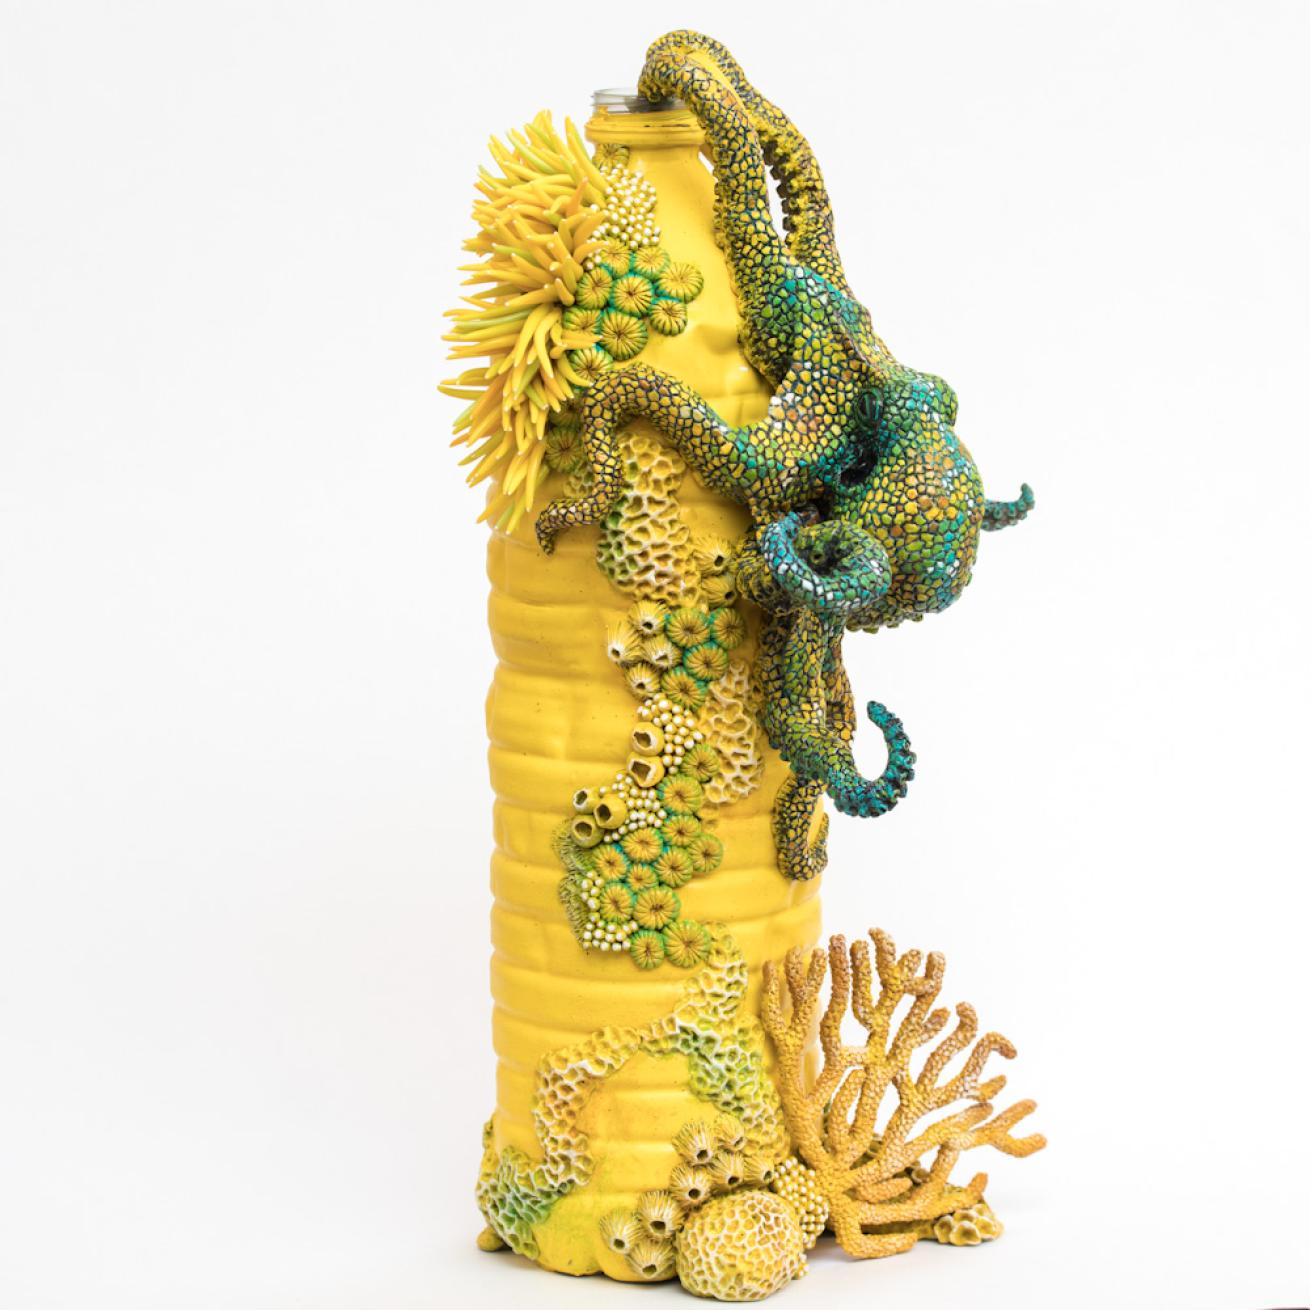 Clay octopus climbs yellow water bottle